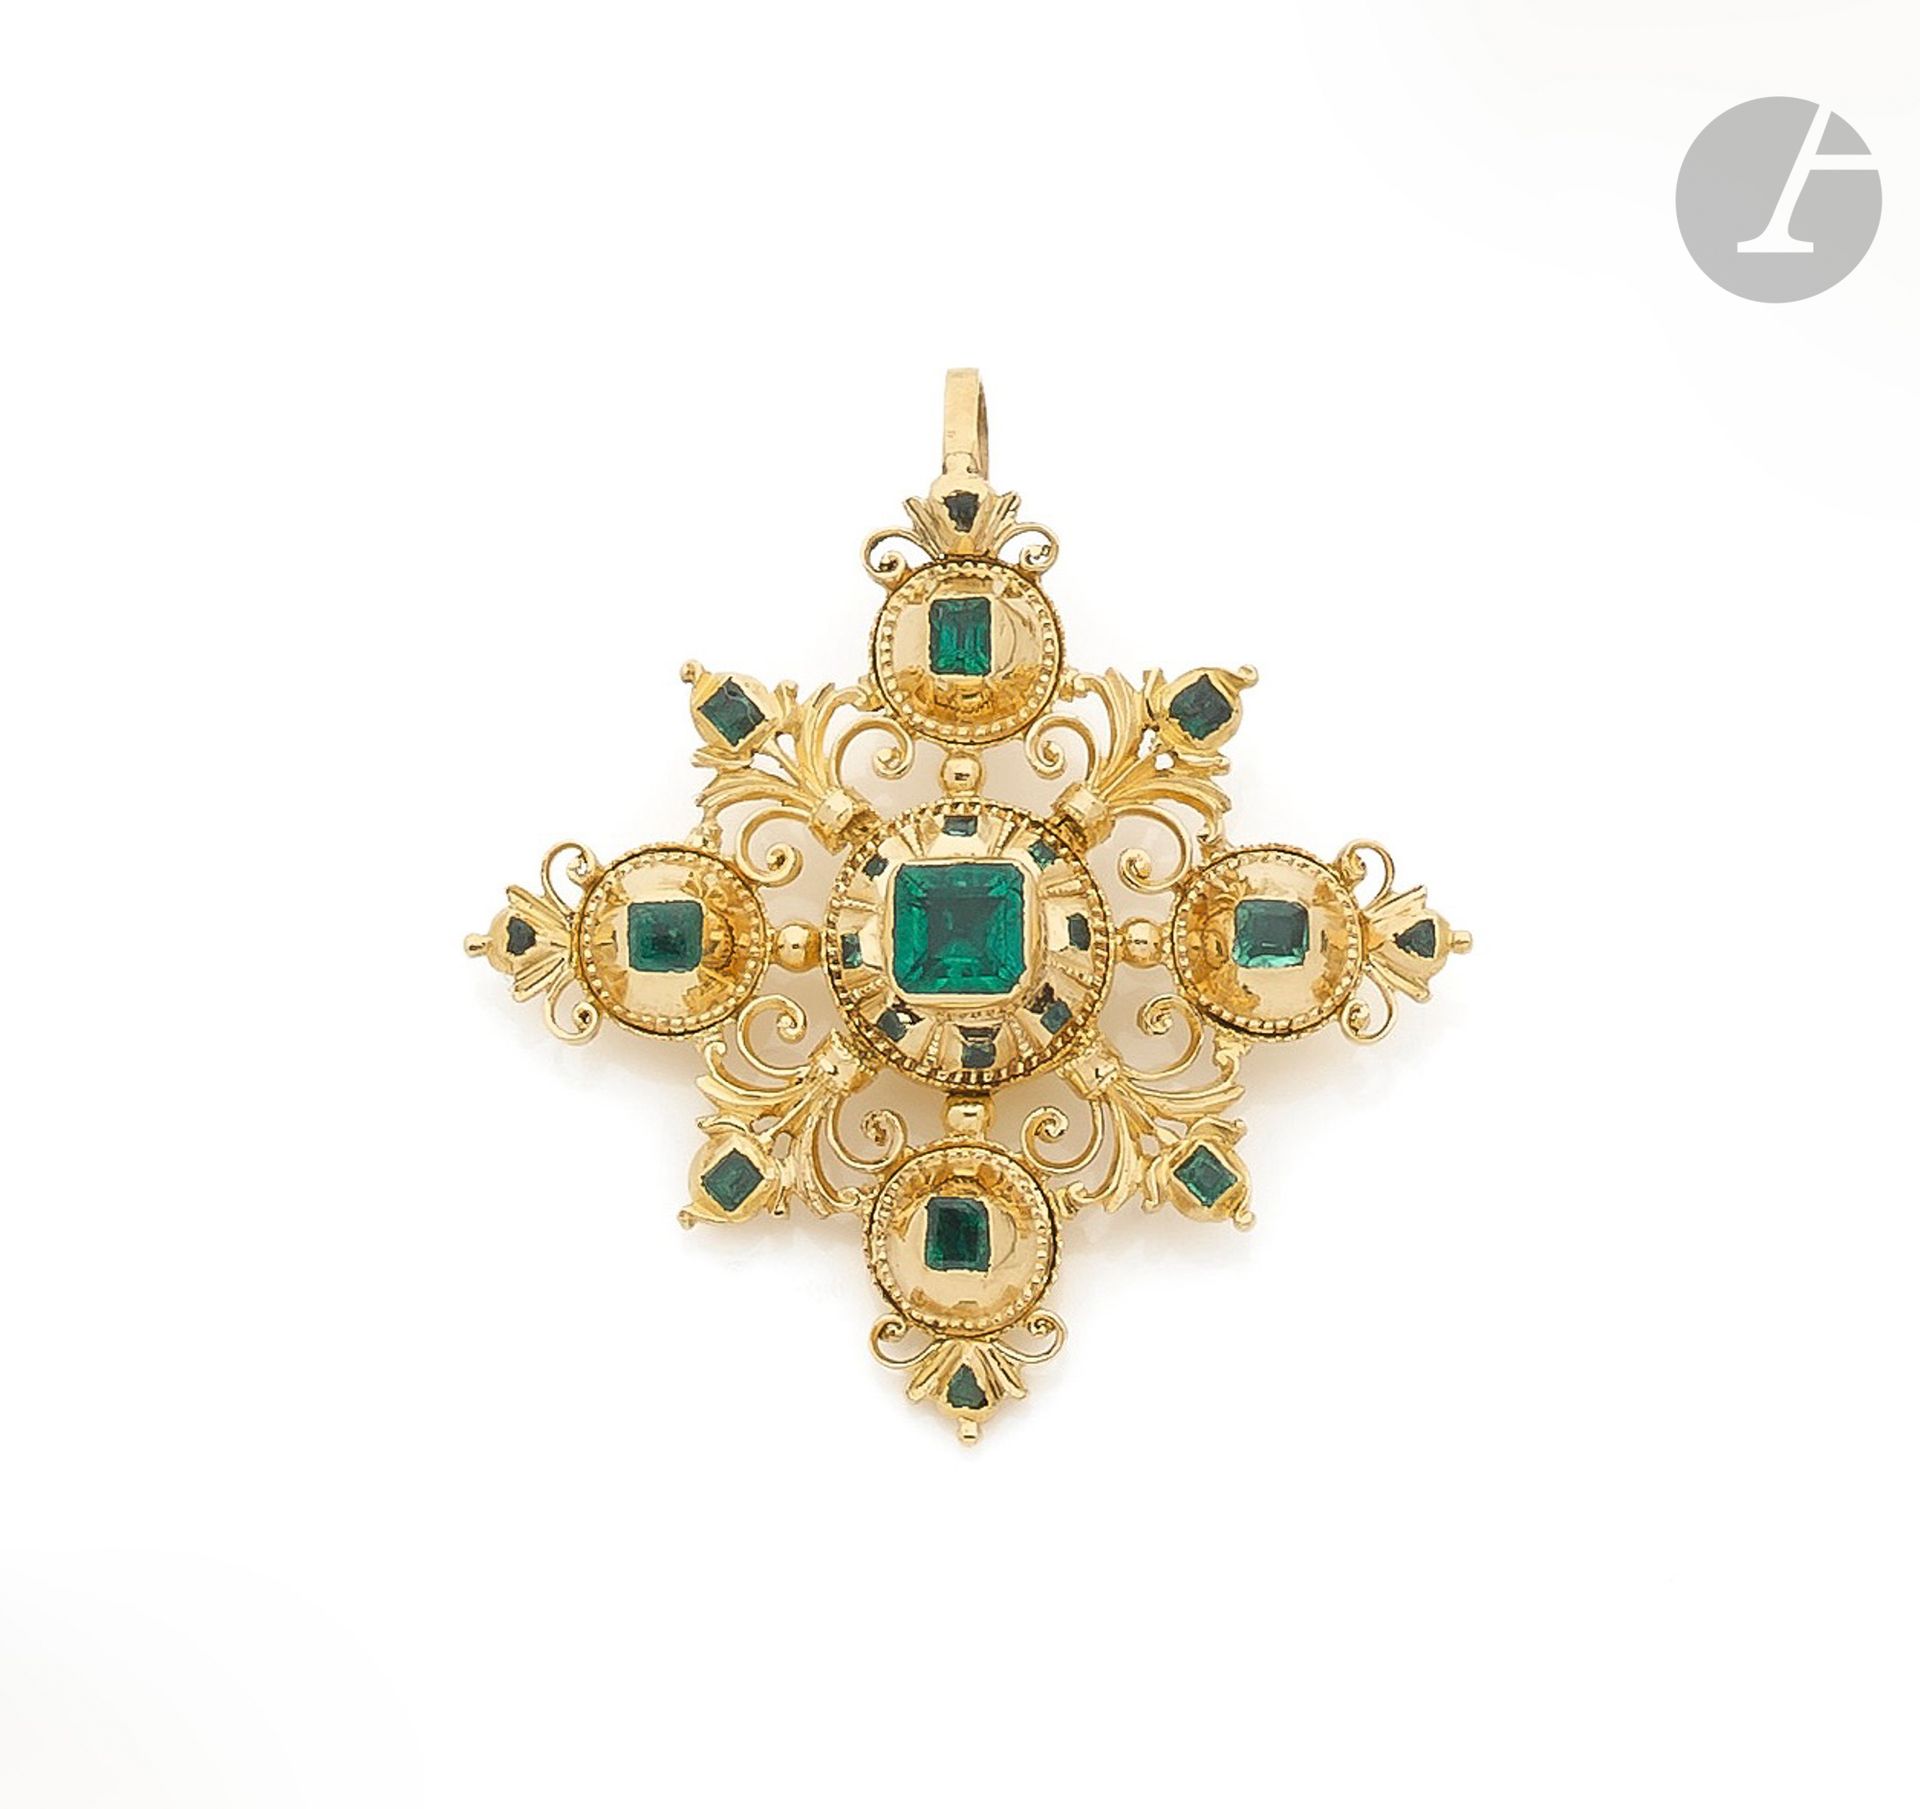 Null Pendant cruciform gold 18K (750) cut set with emeralds. Work of the Iberian&hellip;